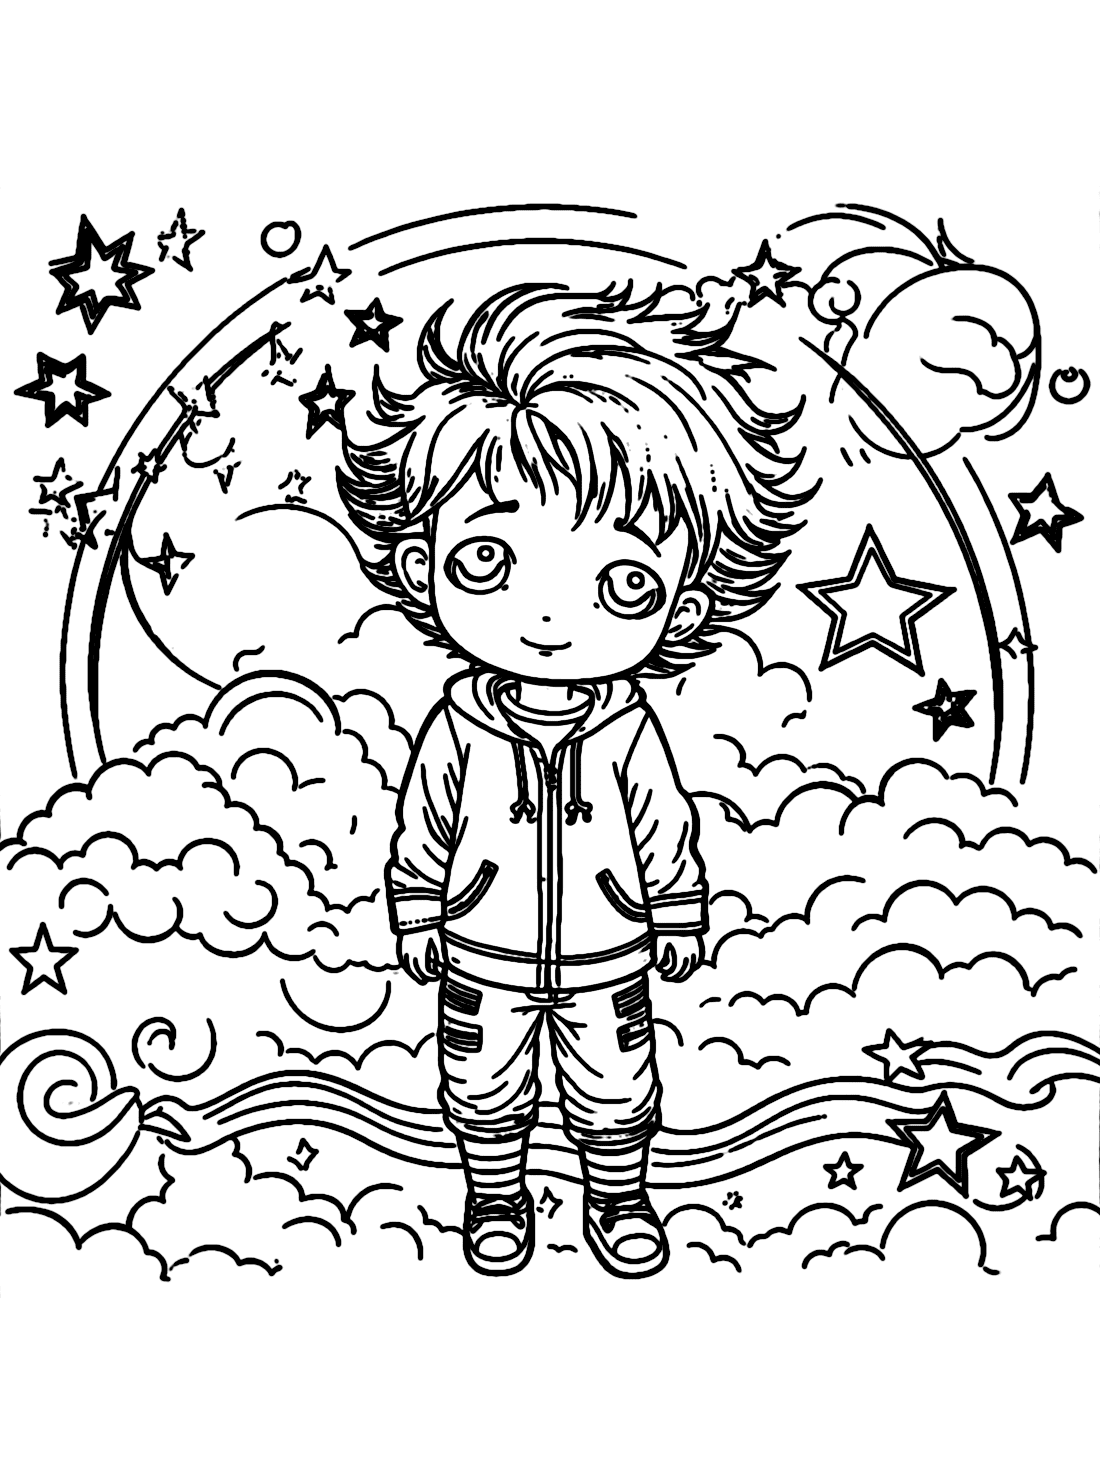 Coloring pages of the sky